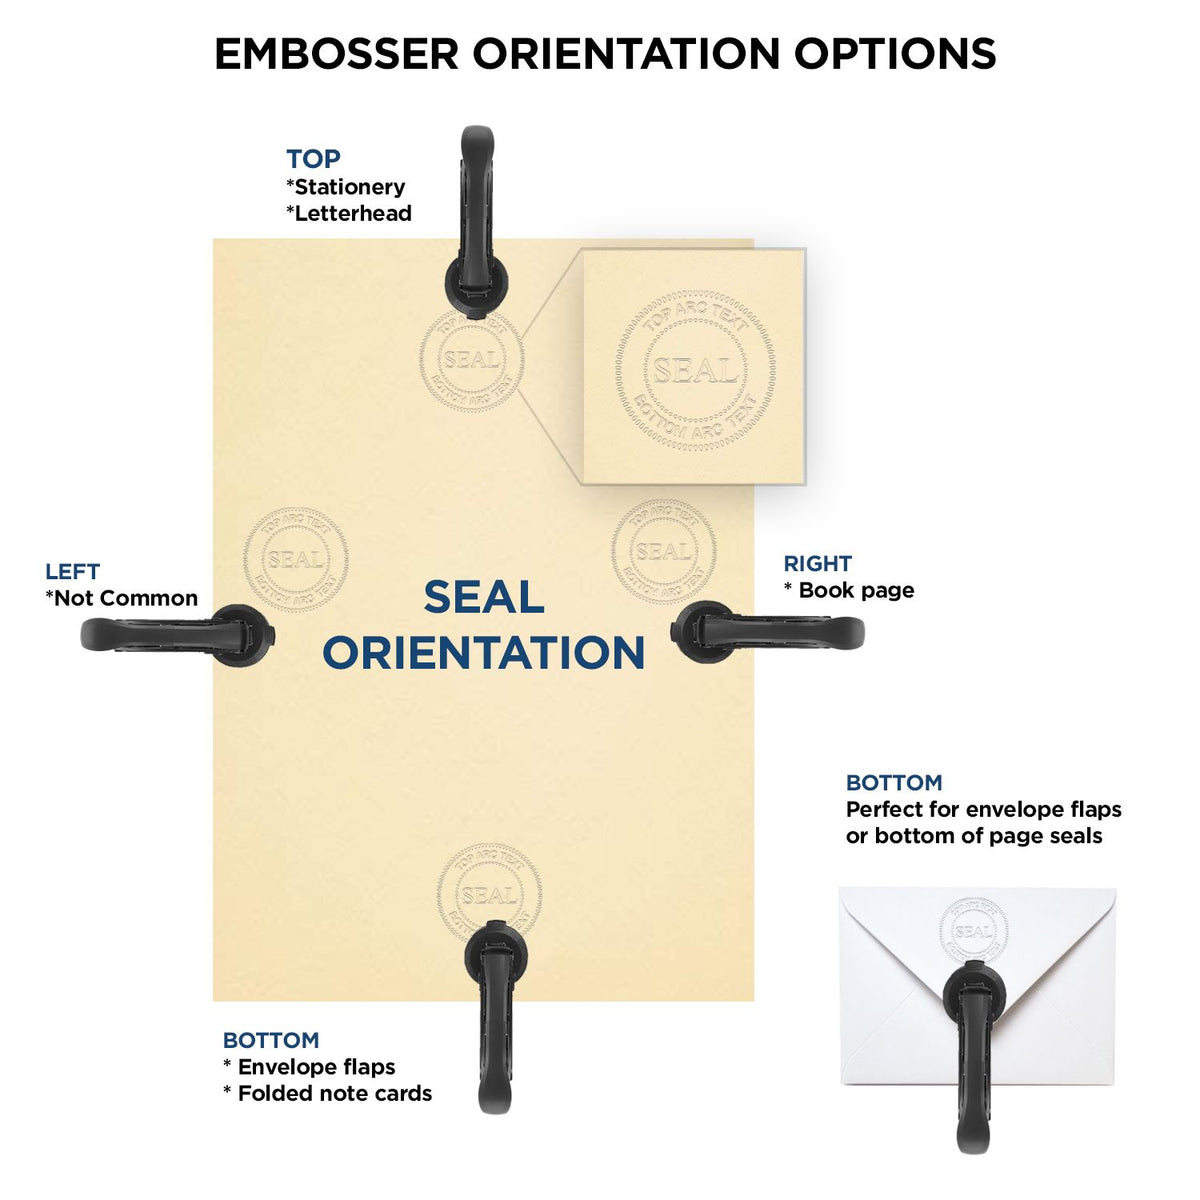 An infographic for the Gift Louisiana Engineer Seal showing embosser orientation, this is showing examples of a top, bottom, right and left insert.